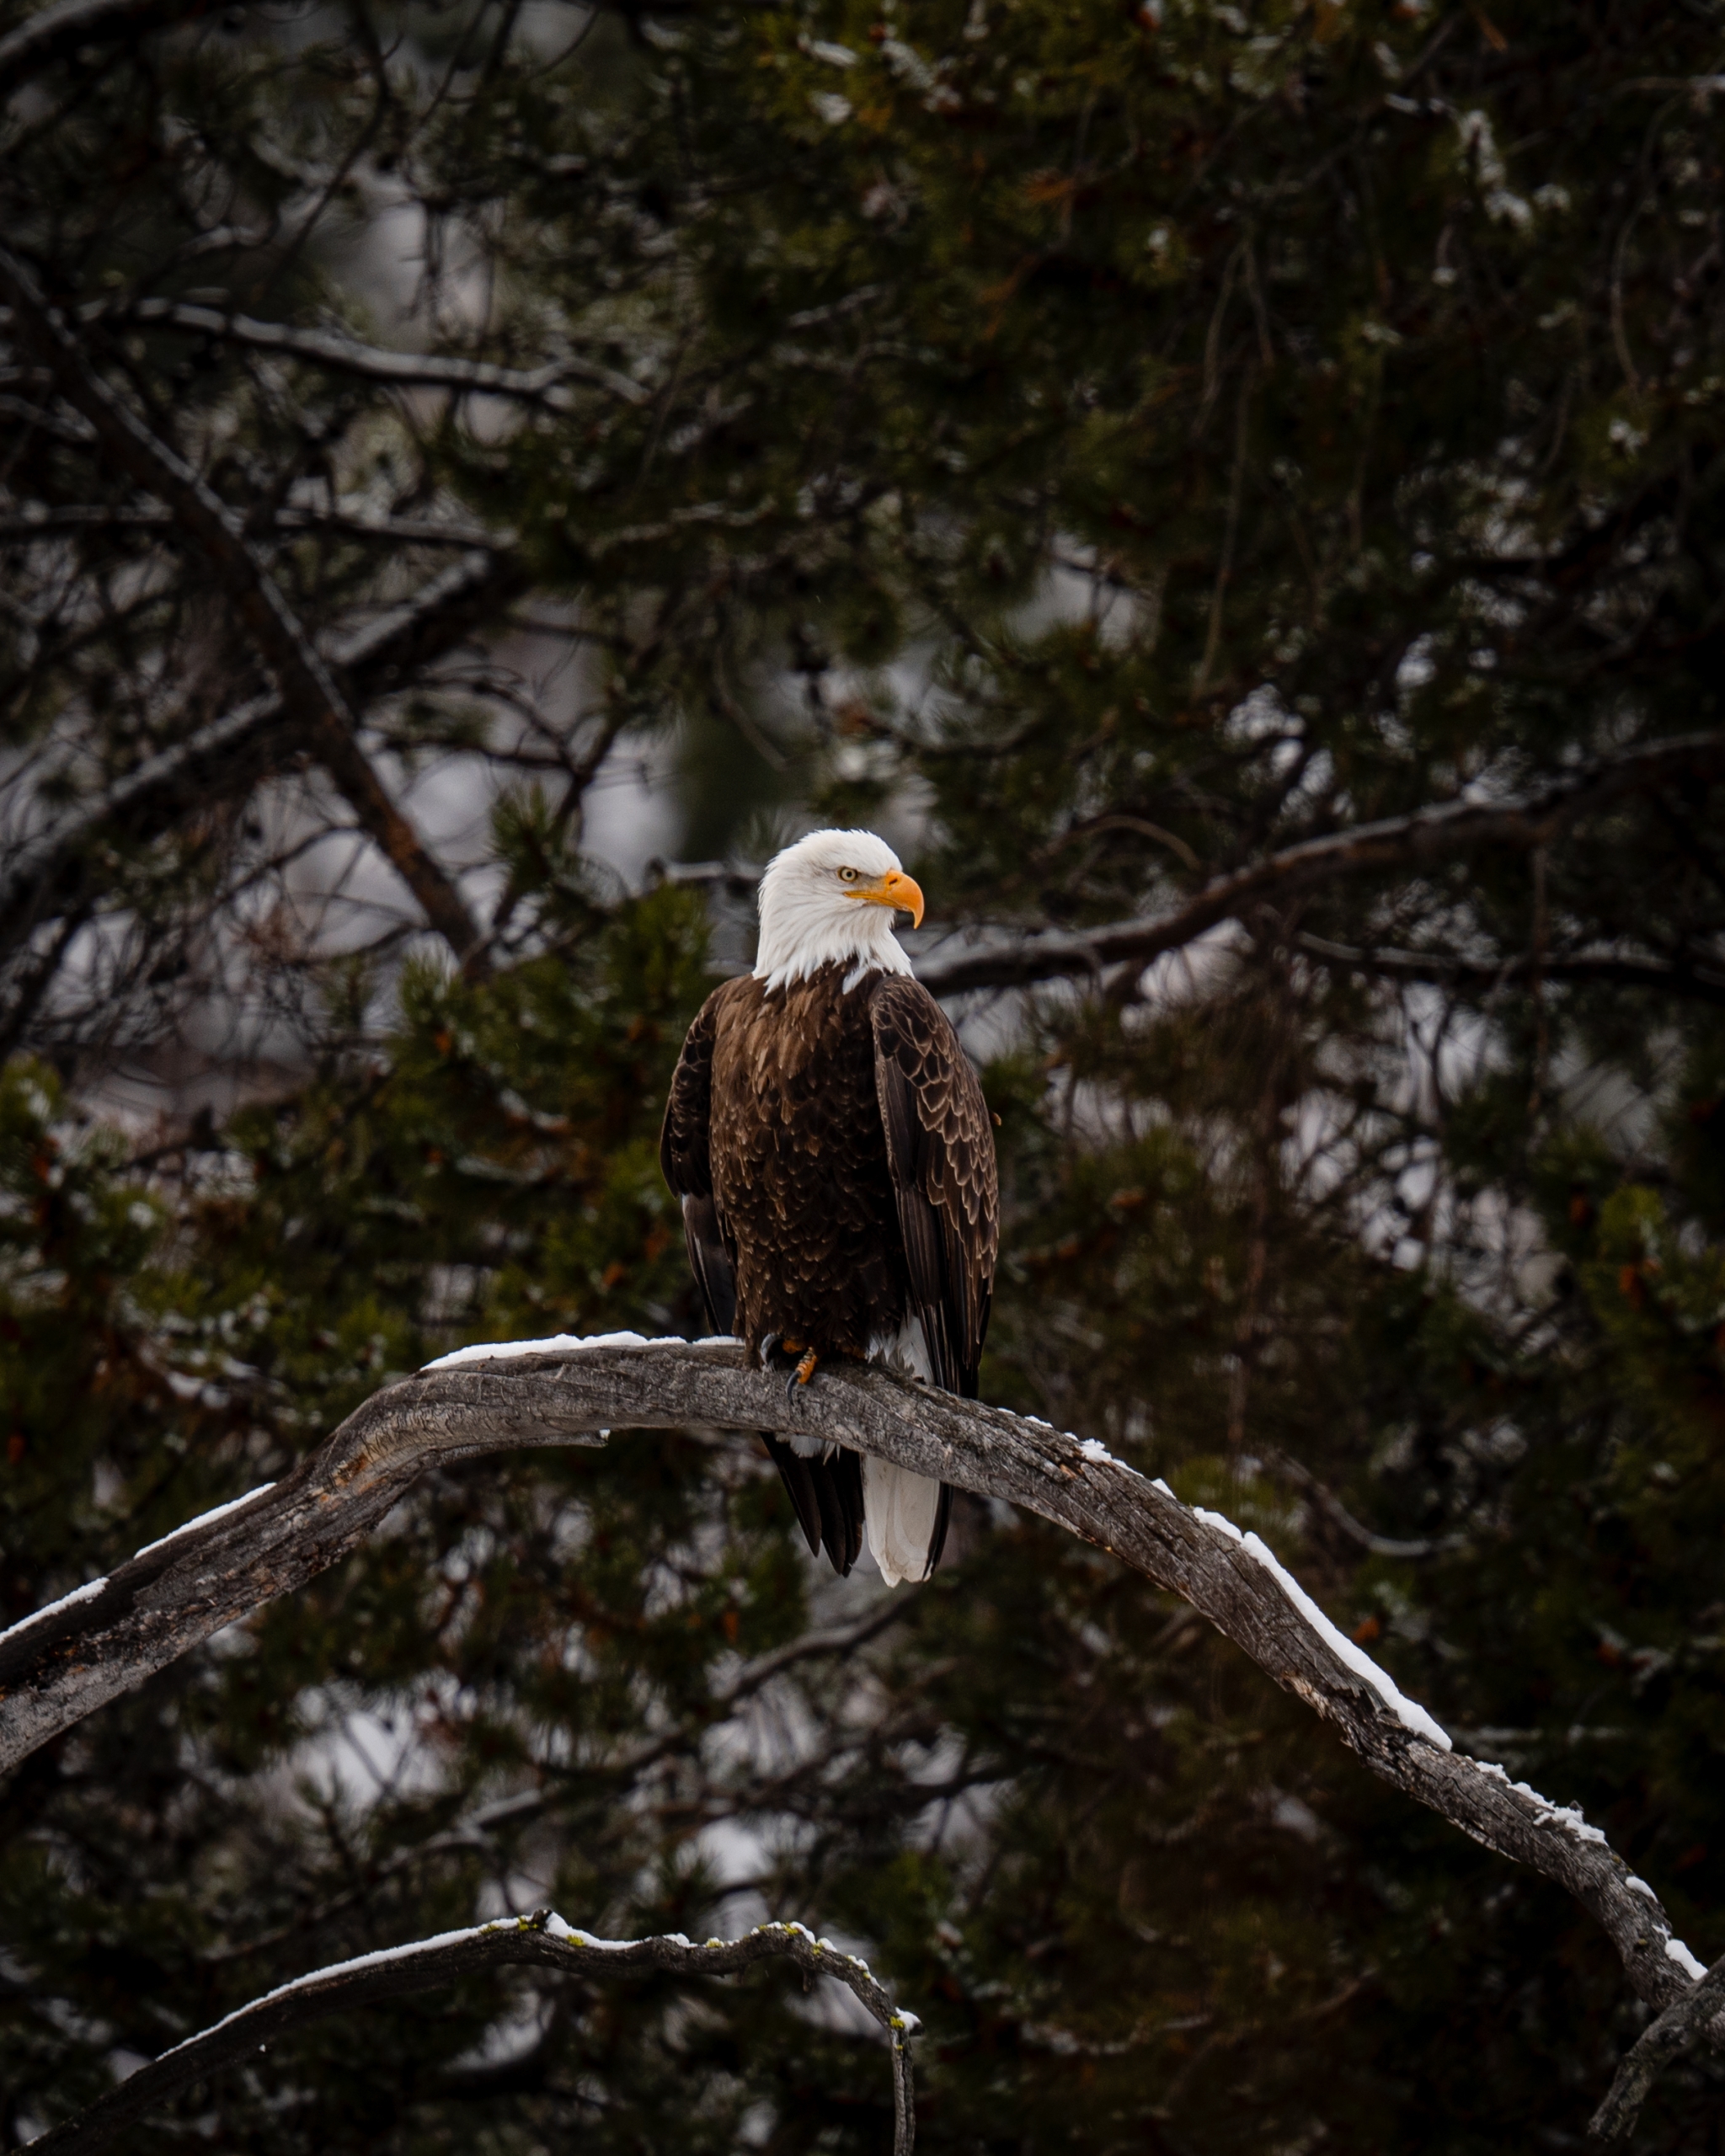 An eagle sits in a tree in Cody Yellowstone